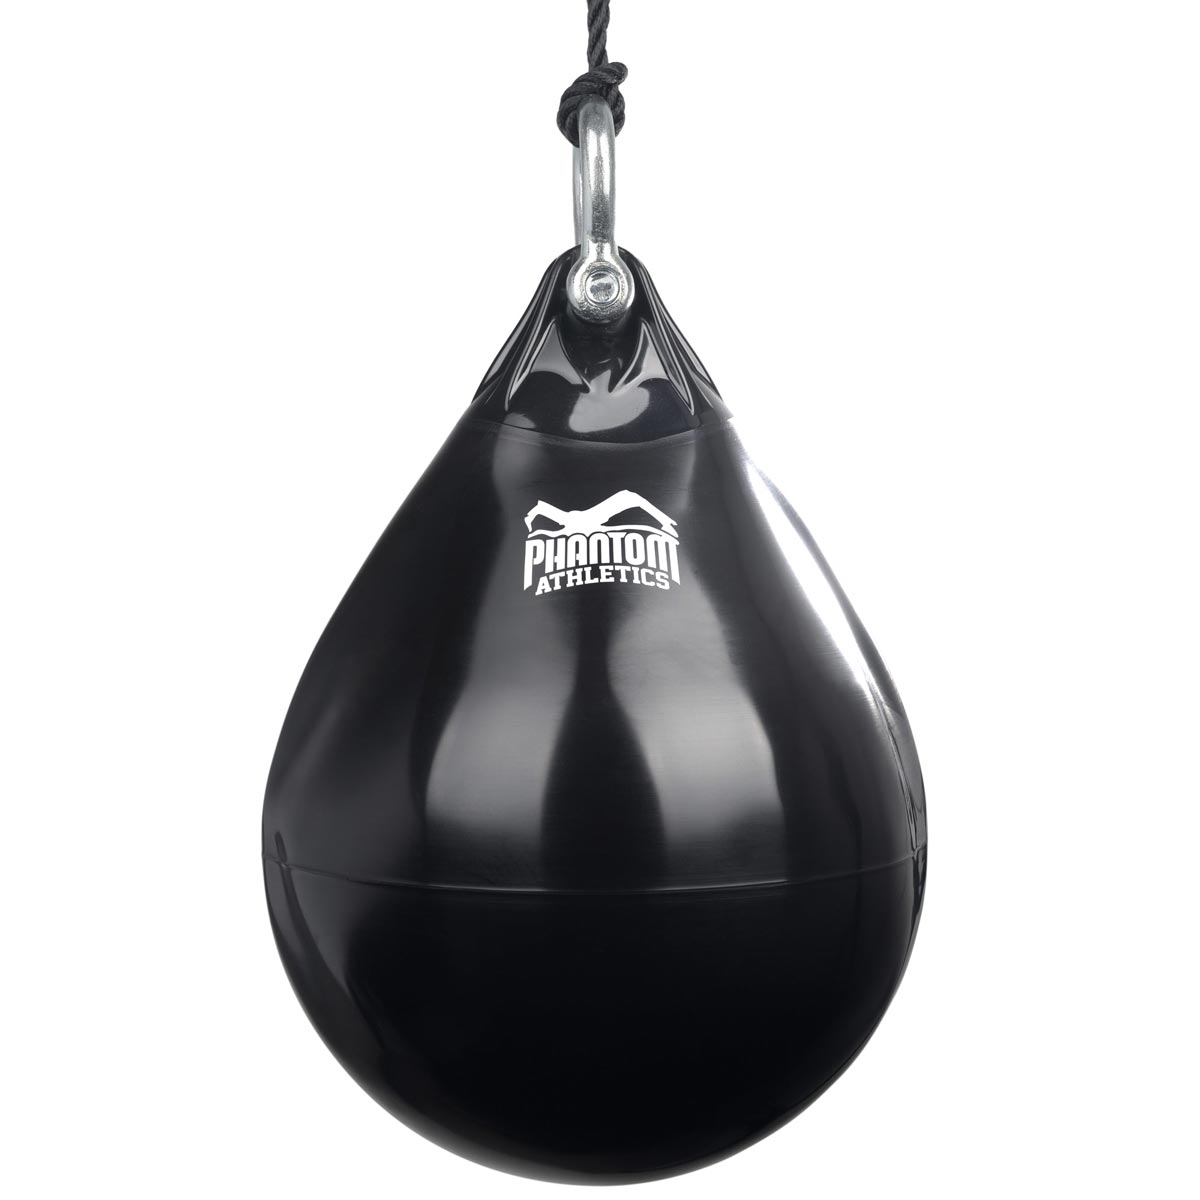 Buy Hydro bag shape pear water Aqua a PHANTOM with in ATHLETICS - filled punching bag 